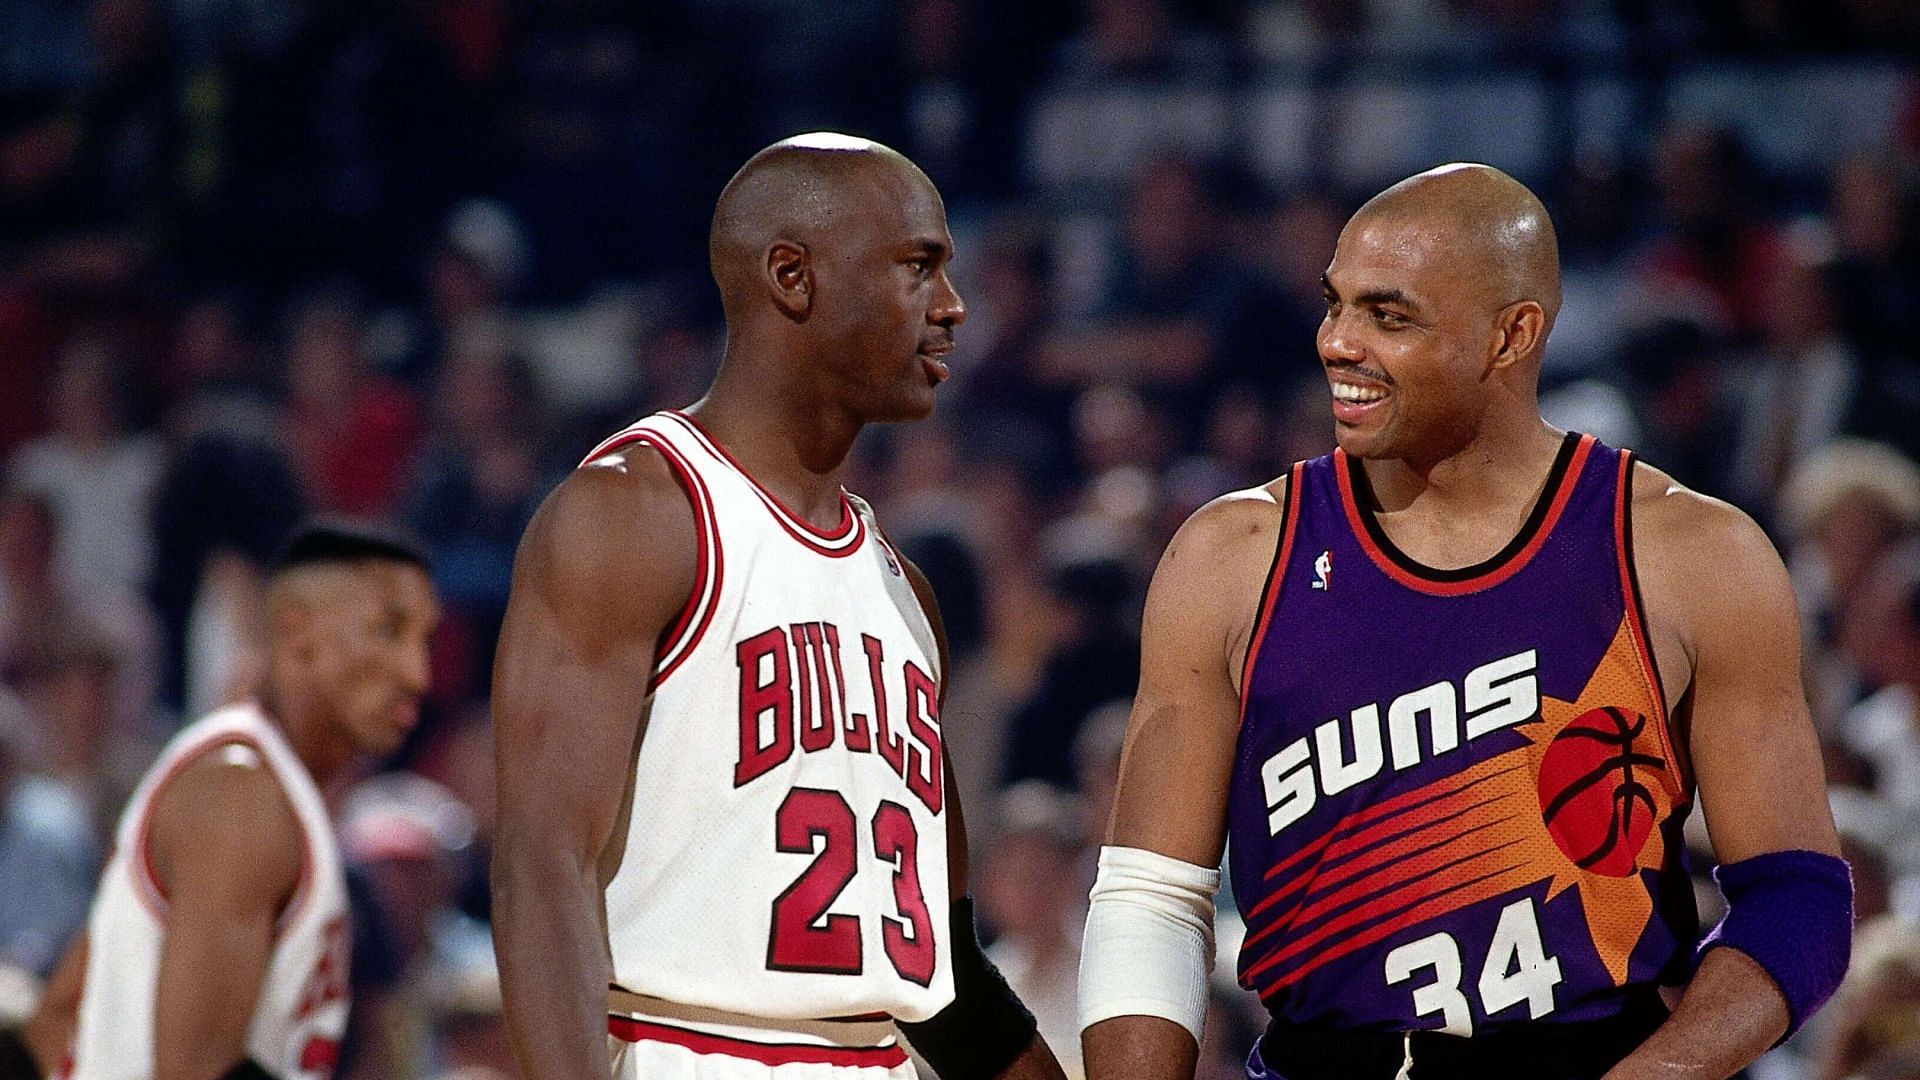 Michael Jordan with Charles Barkley of the Phoenix Suns during Game 4 of the 1993 NBA Finals